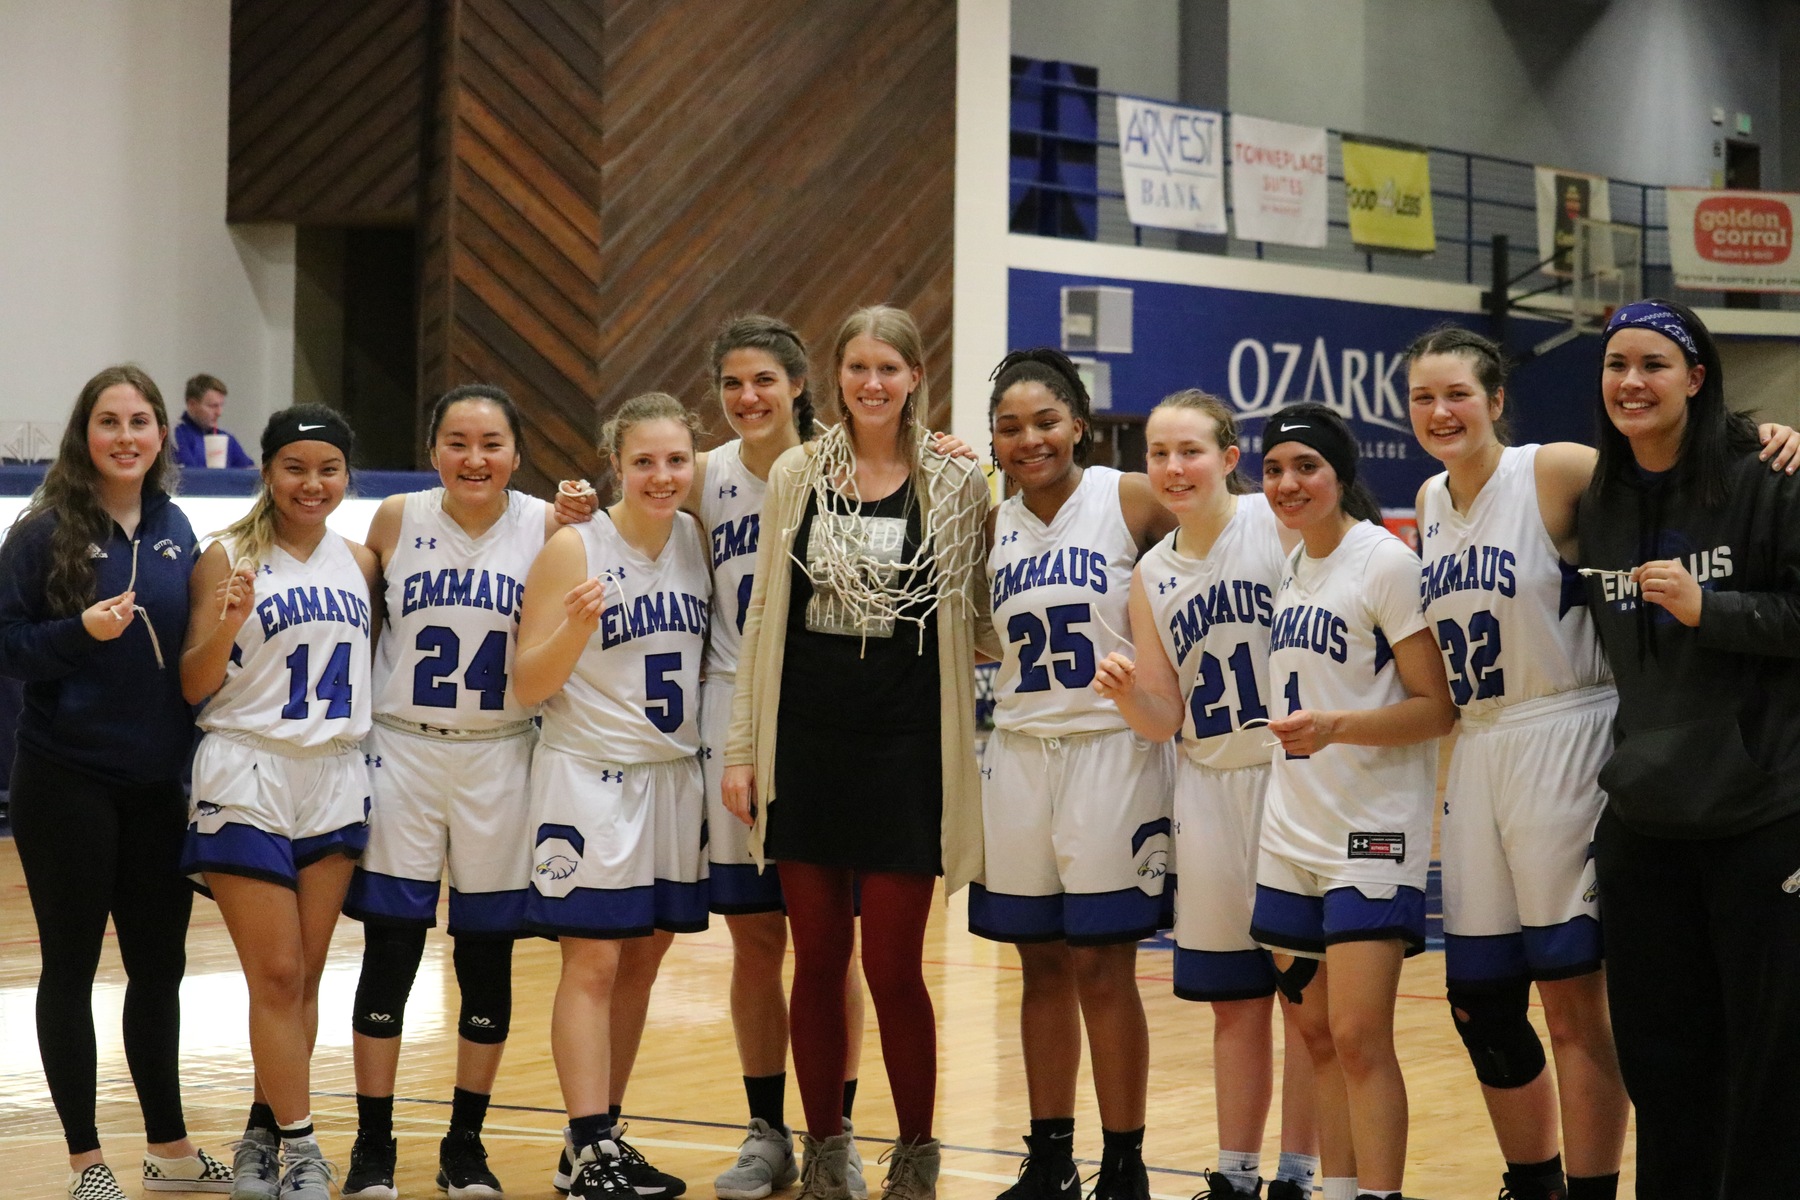 Lady Eagles Claim 4th MCCC Championship in 5 Years